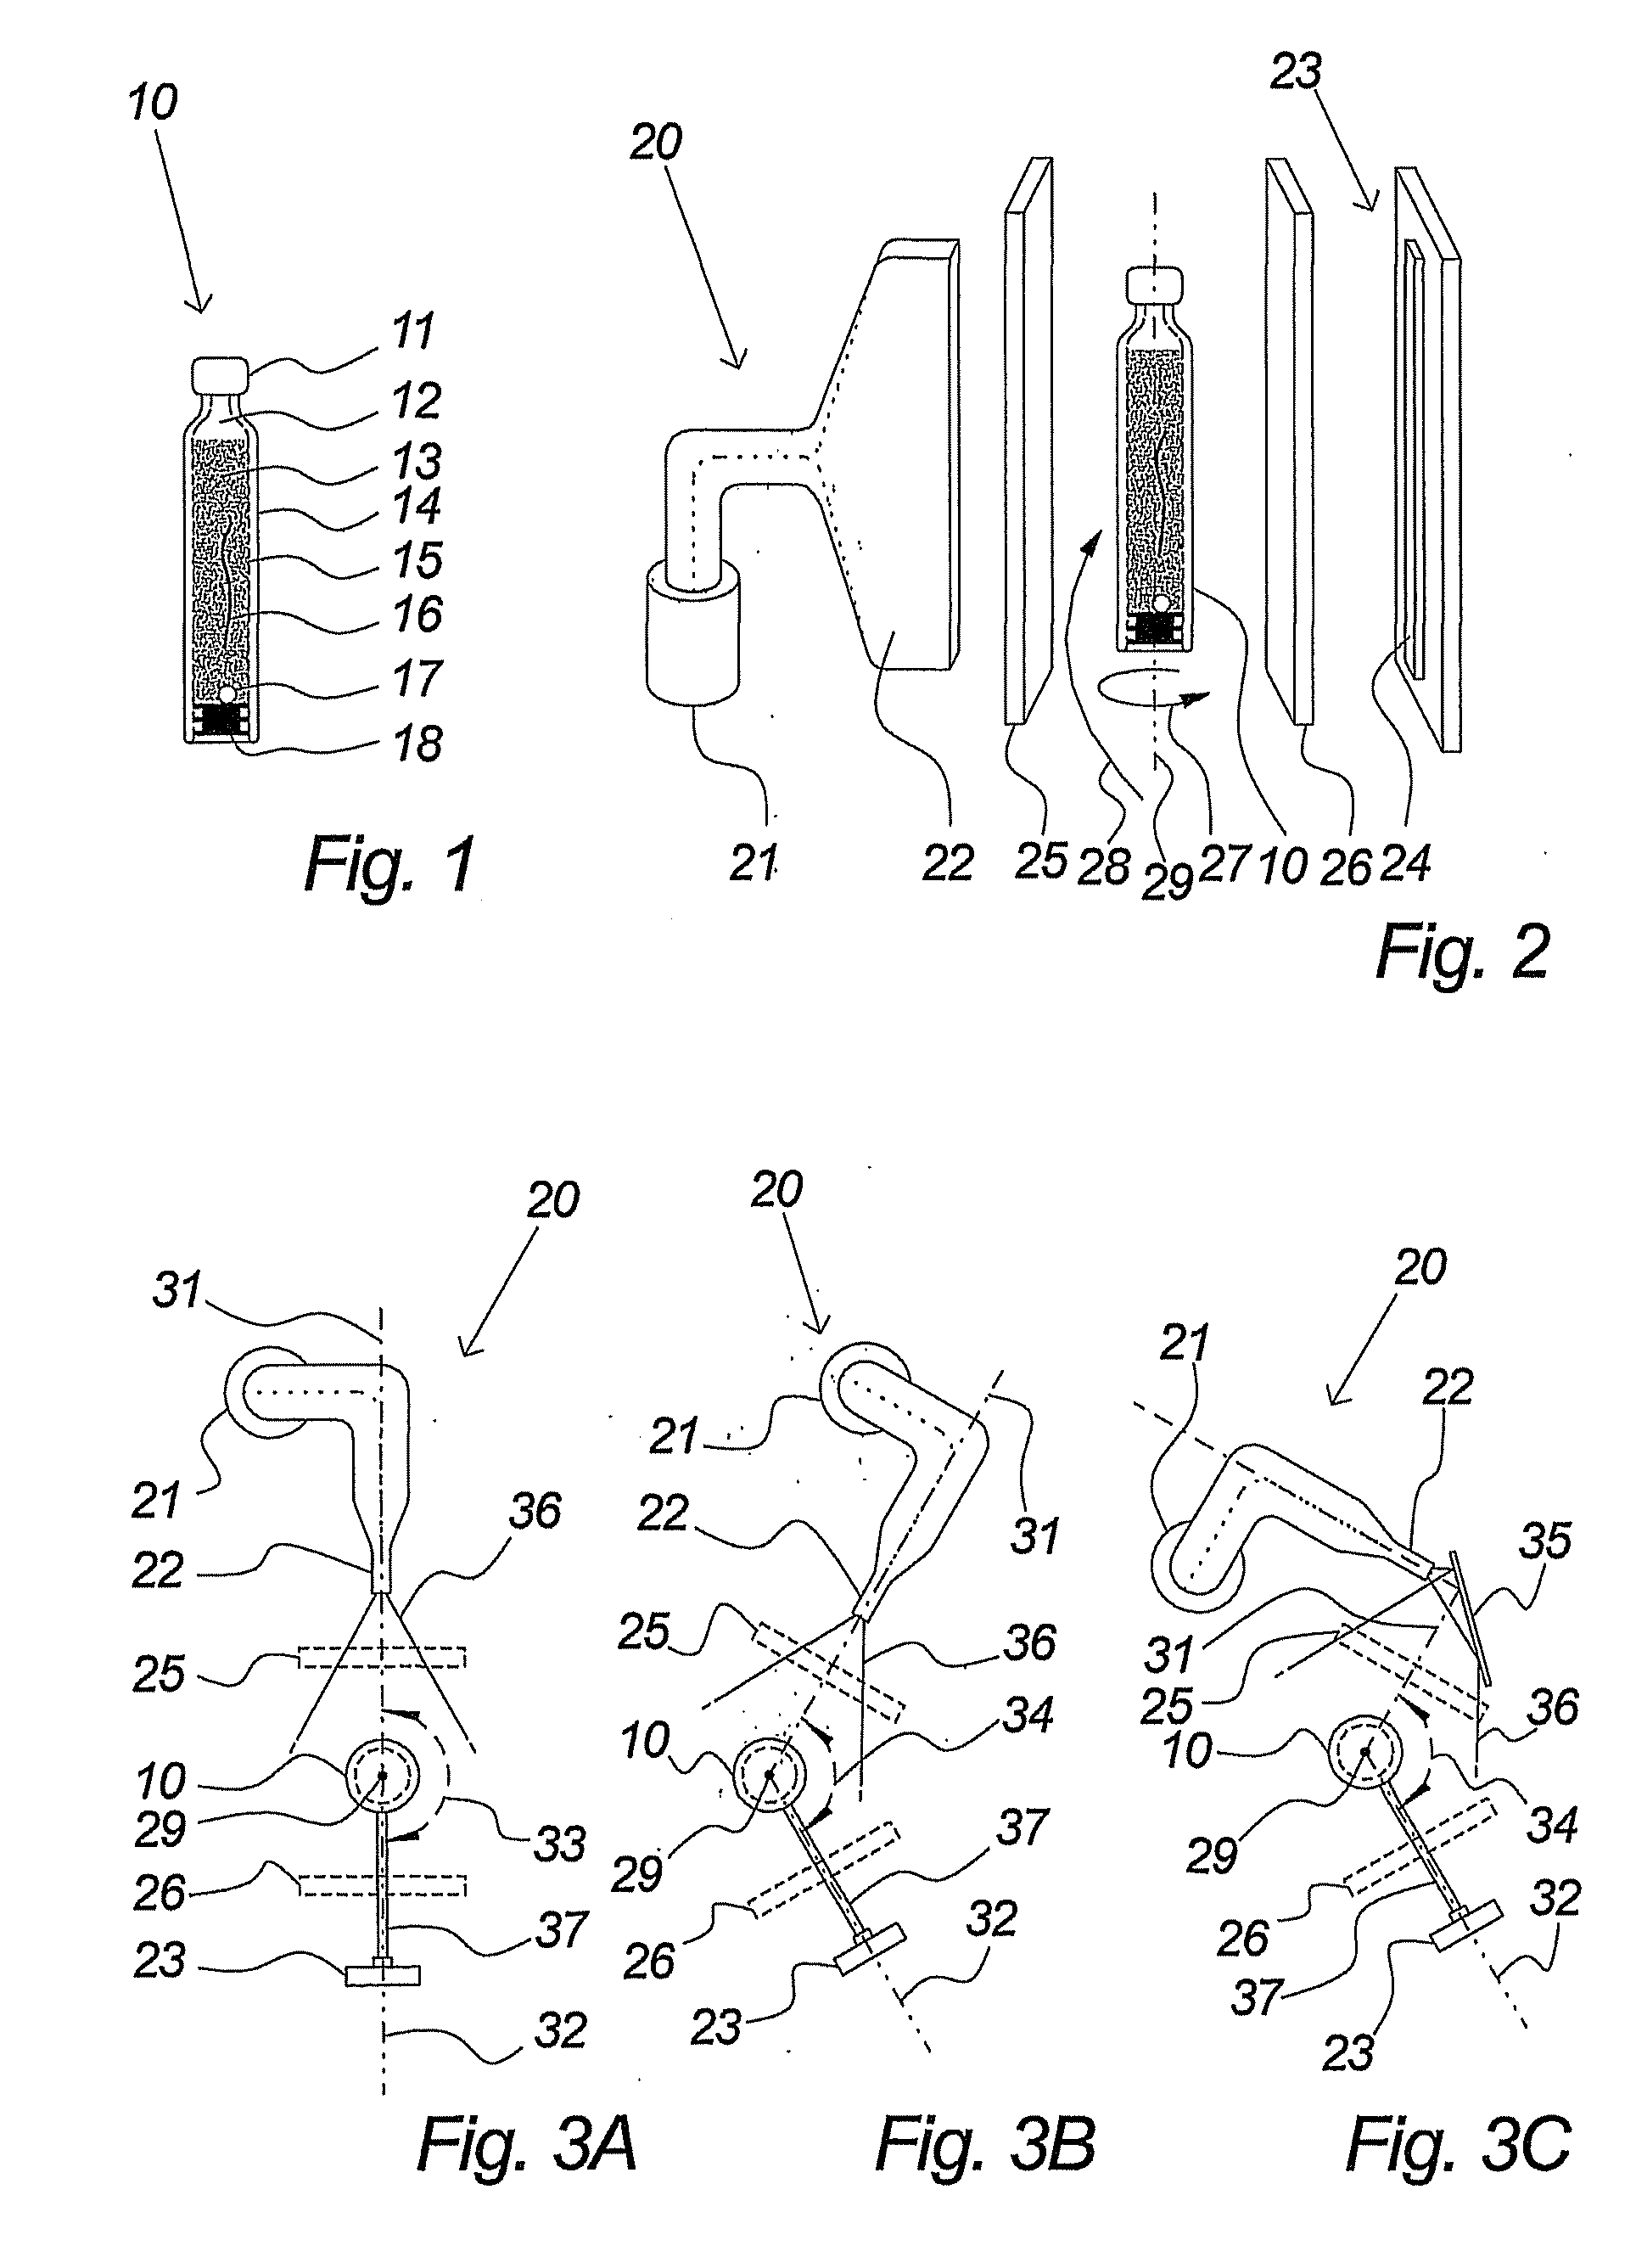 Method and System For Irradiating and Inspecting Liquid-Carrying Containers